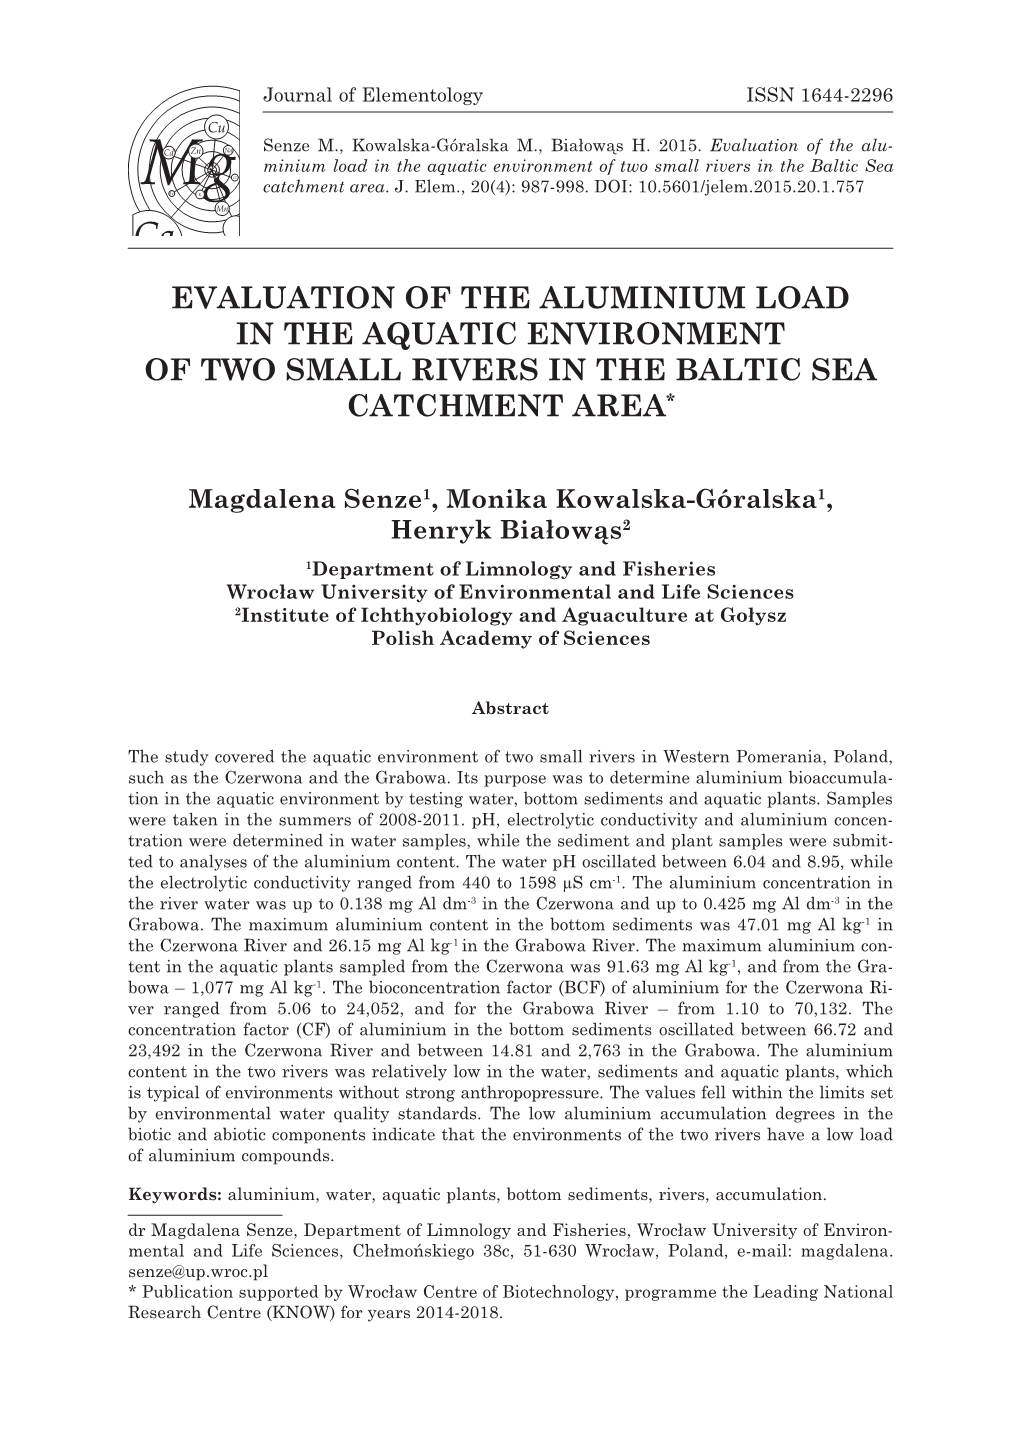 Evaluation of the Aluminium Load in the Aquatic Environment of Two Small Rivers in the Baltic Sea Catchment Area*